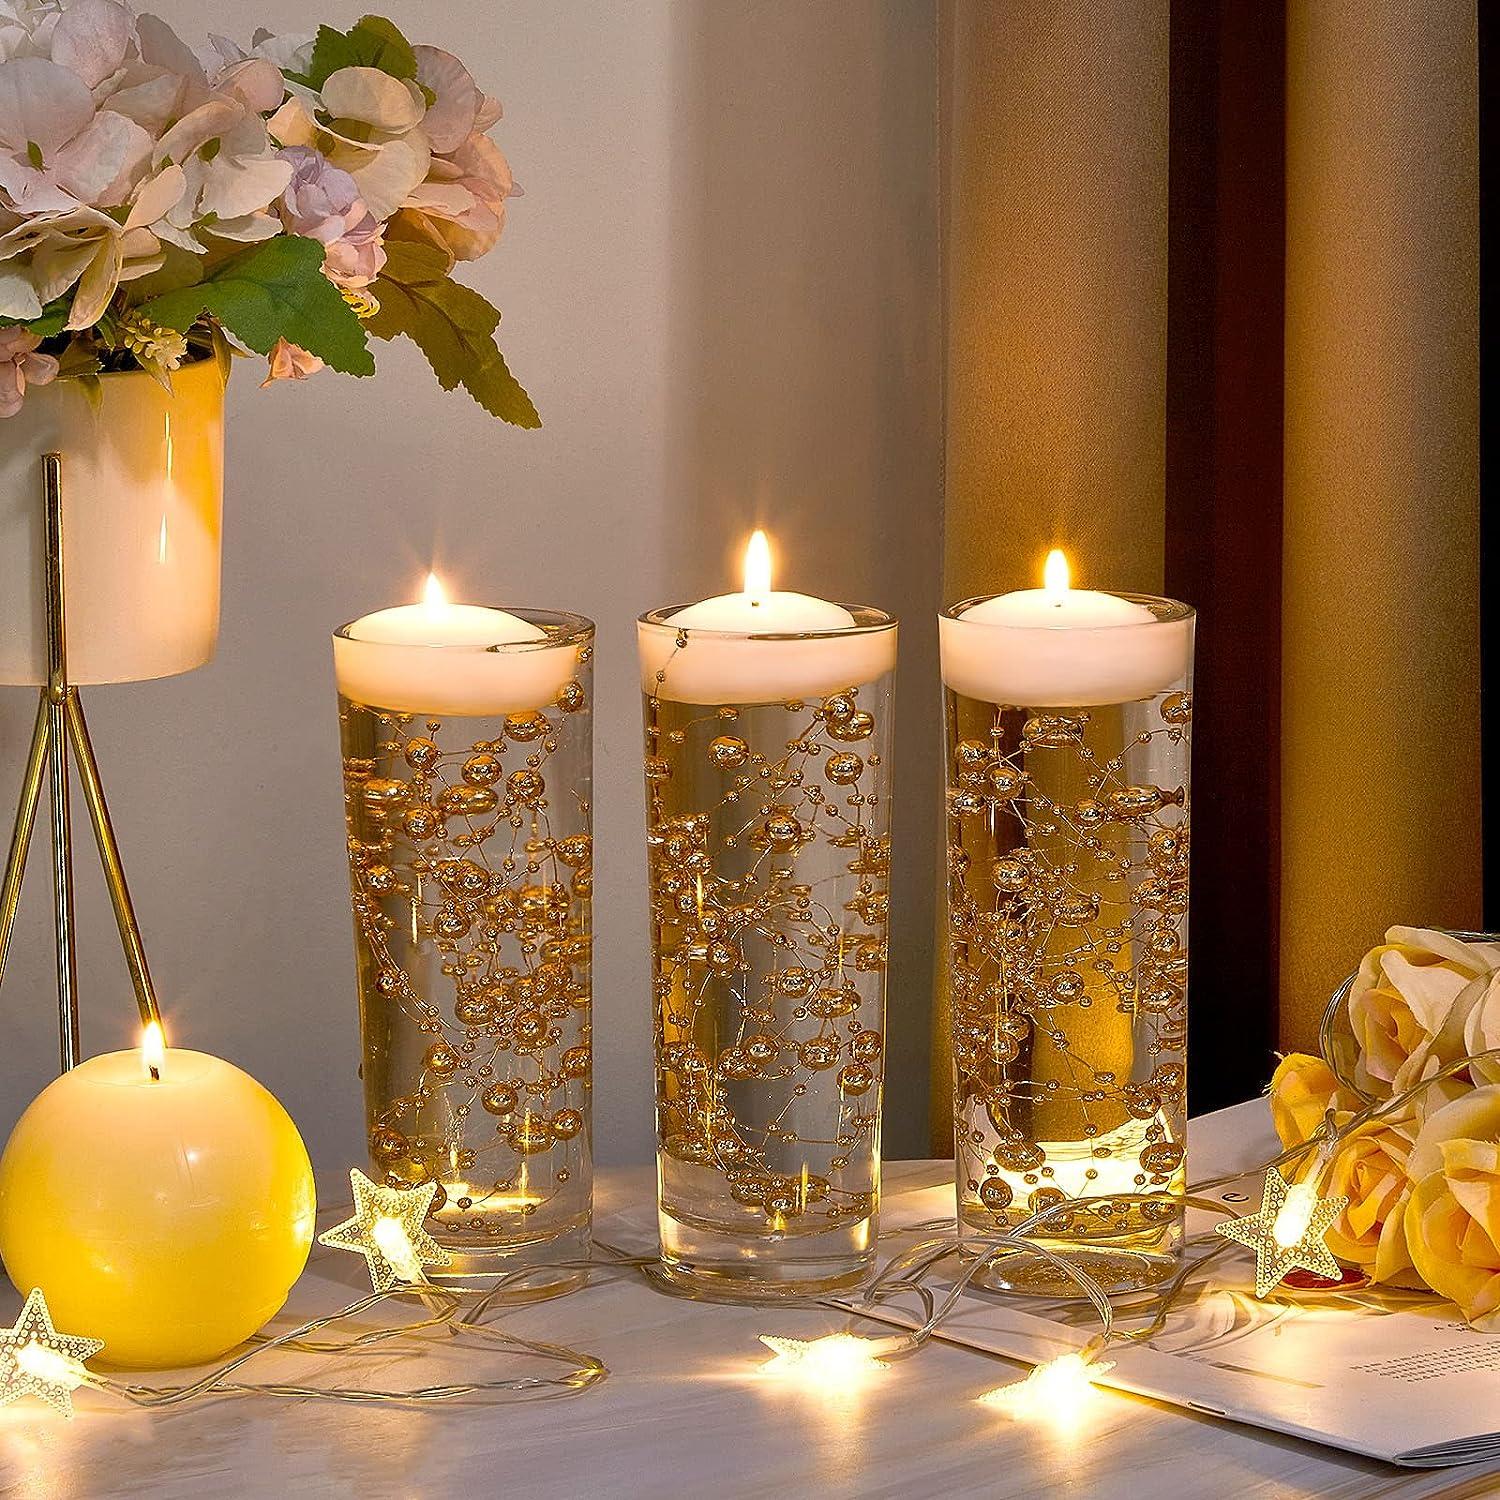 How to Decorate Your Wedding Tables with Pearls